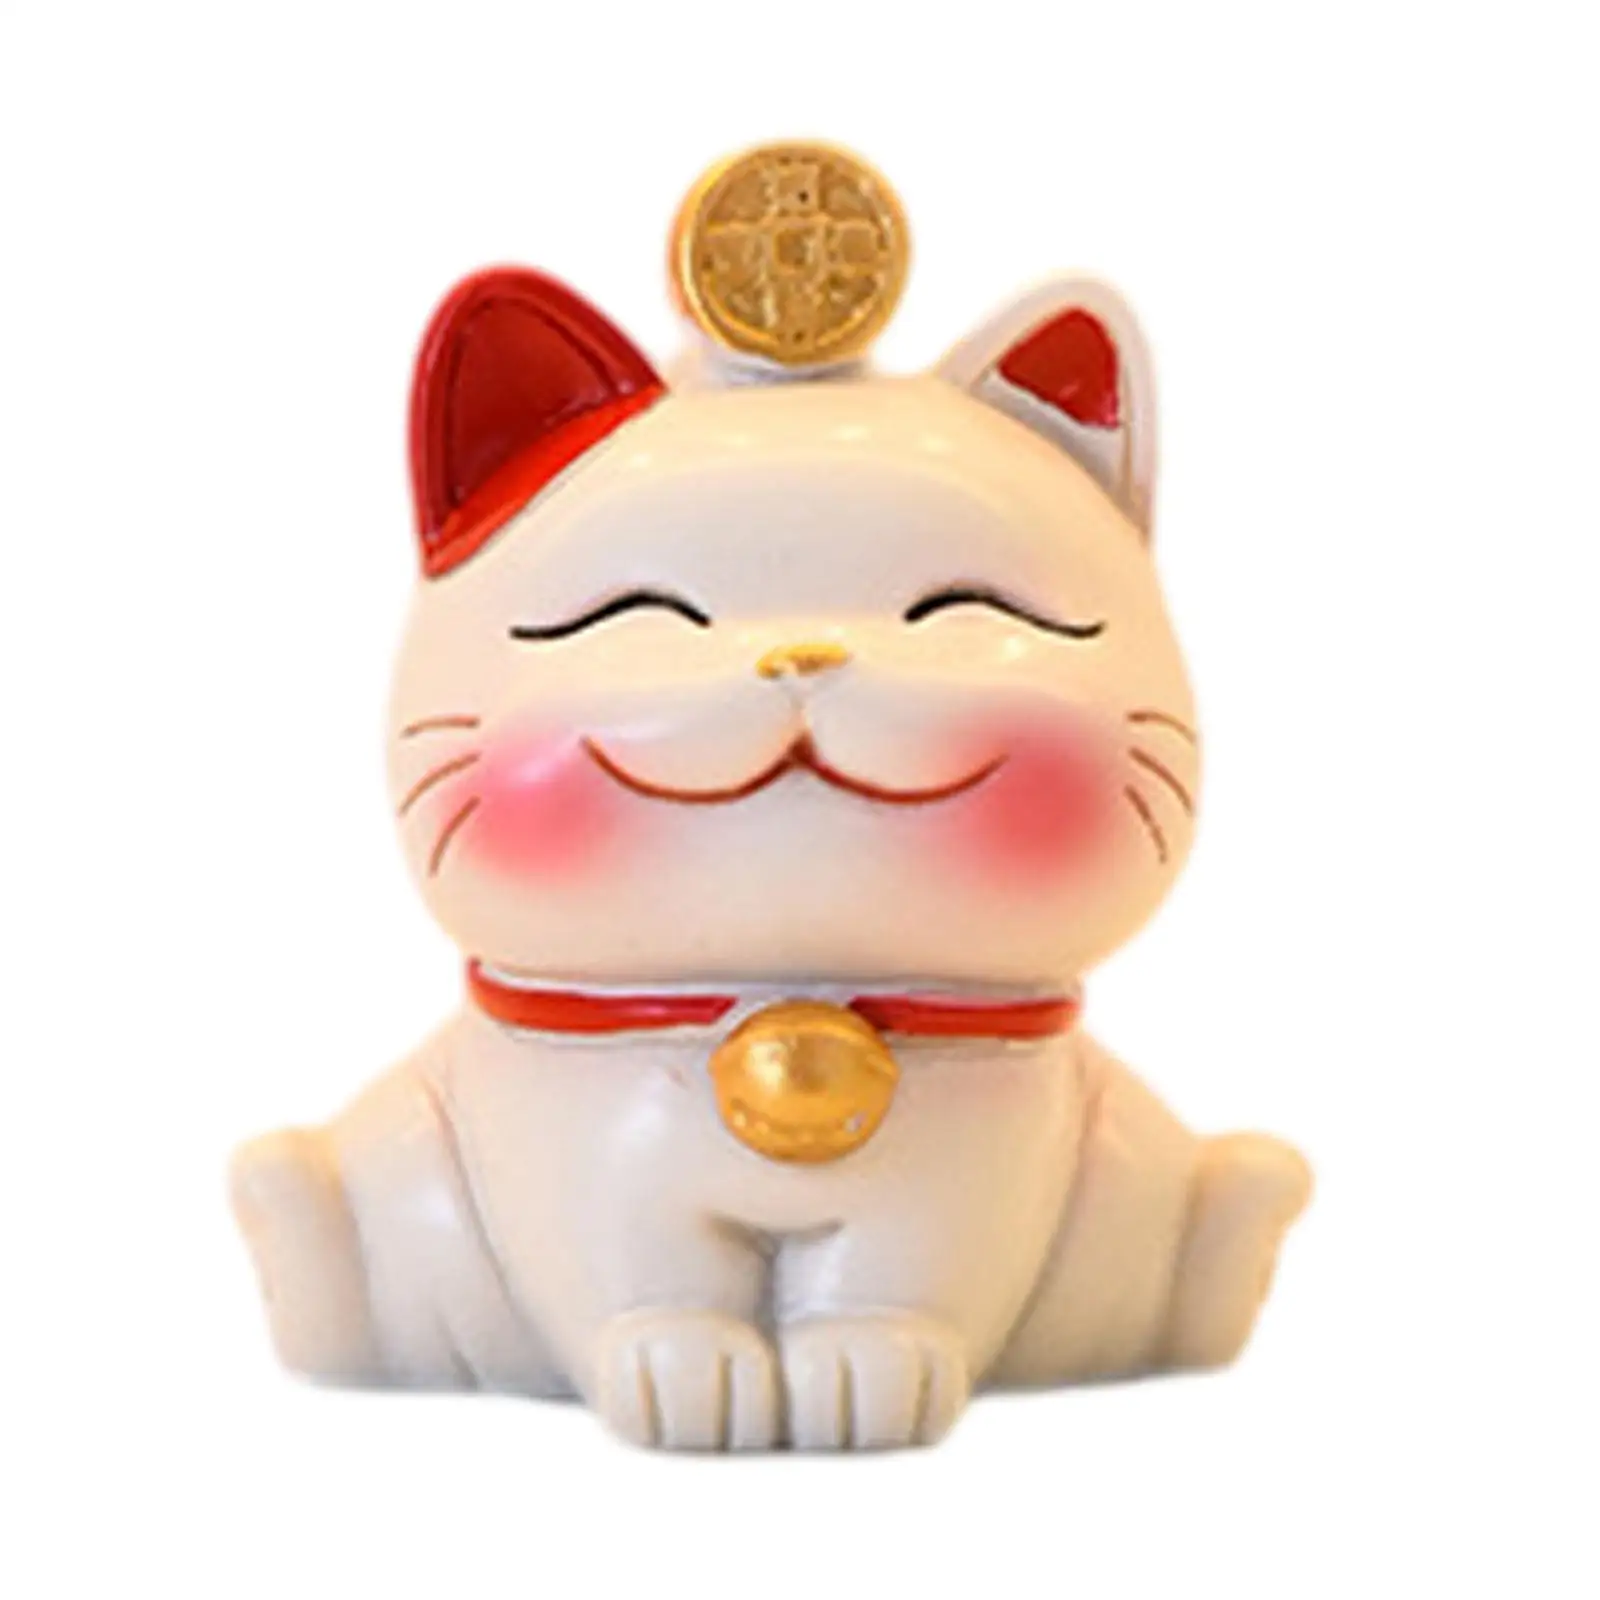 Chinese Cat Statue Mini Lucky Cat Figurine Desk Decorations Birthday Gift Welcoming Cat for Shelf Entrance Front Desk Decoration